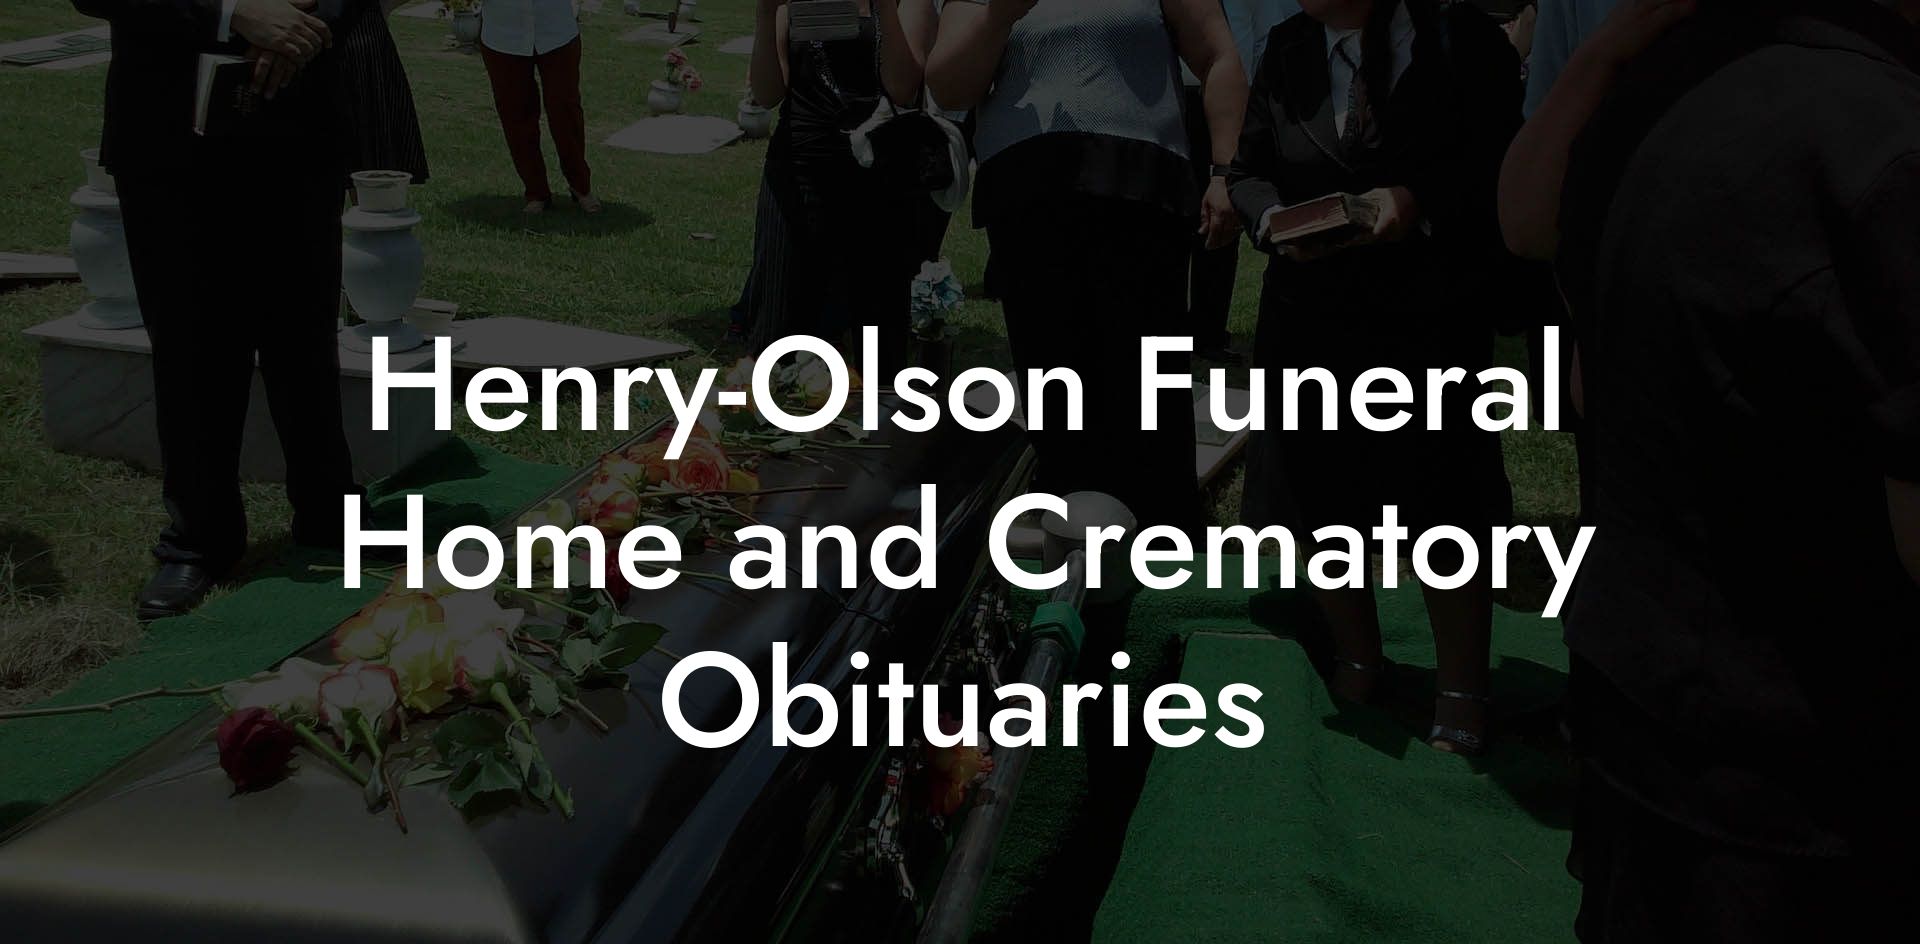 Henry-Olson Funeral Home and Crematory Obituaries